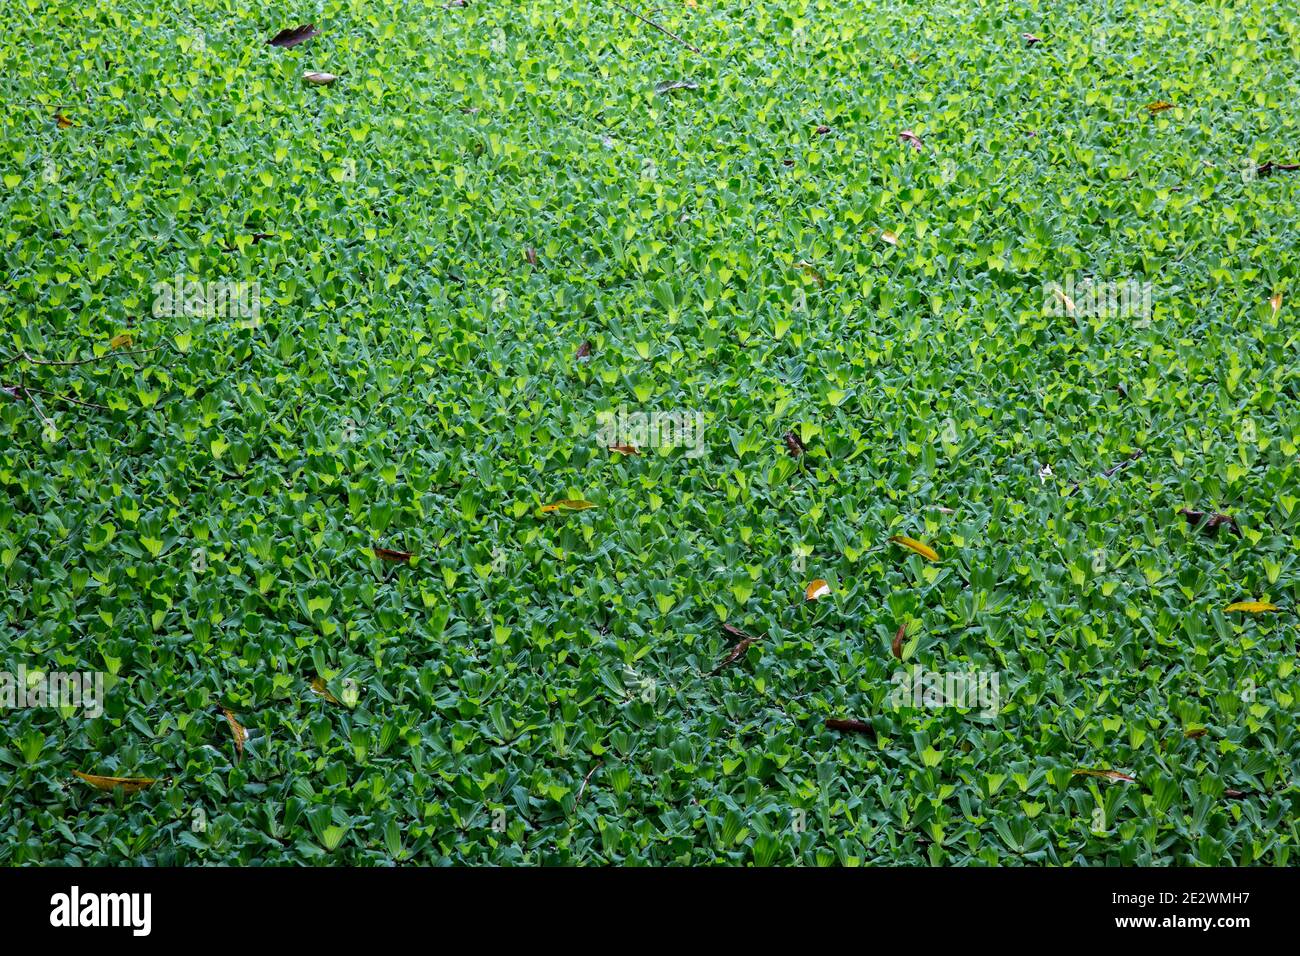 Eichhornia crassipes or common water hyacinth covered a waterbody. Chandpur, Bangladesh Stock Photo